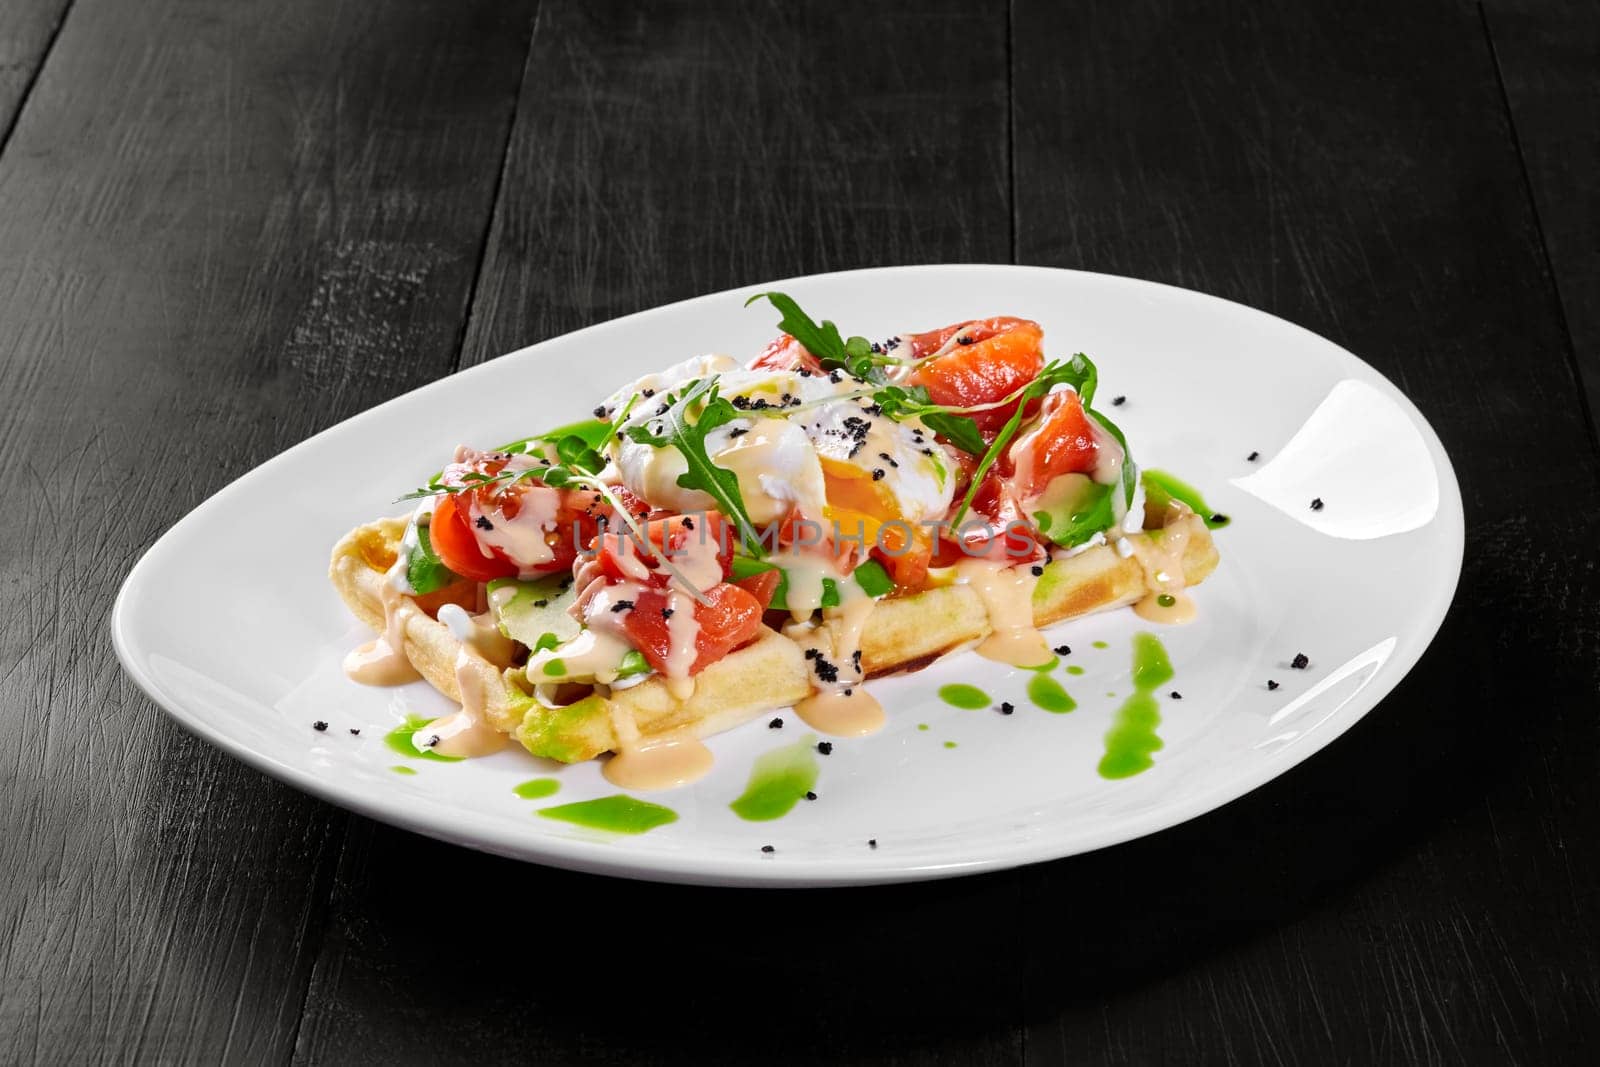 Delicious Belgian waffle topped with avocado slices, salty salmon fillet, poached egg and fresh arugula dressed with sauce. Mediterranean style brunch